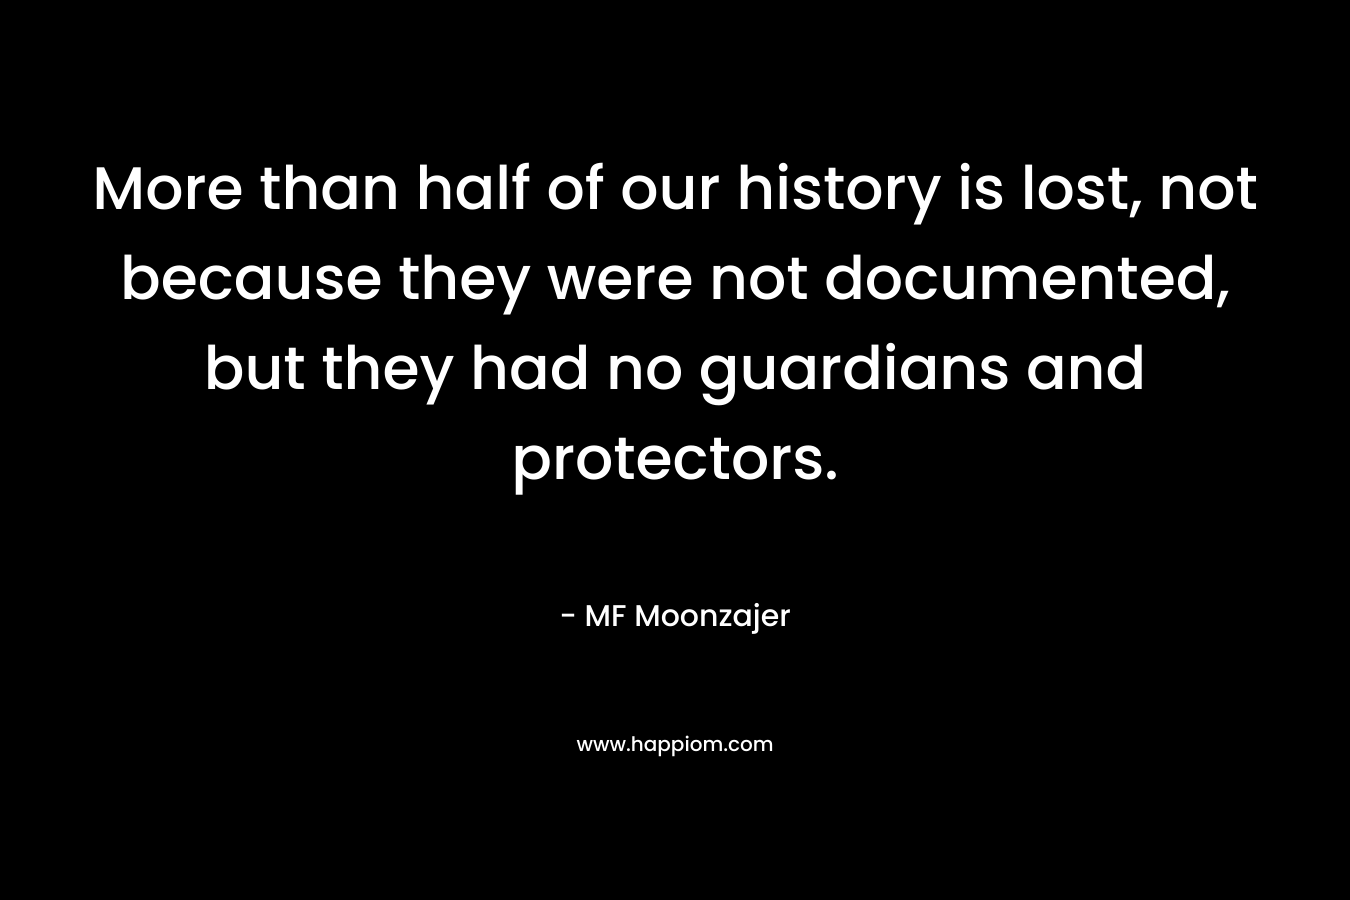 More than half of our history is lost, not because they were not documented, but they had no guardians and protectors. – MF Moonzajer